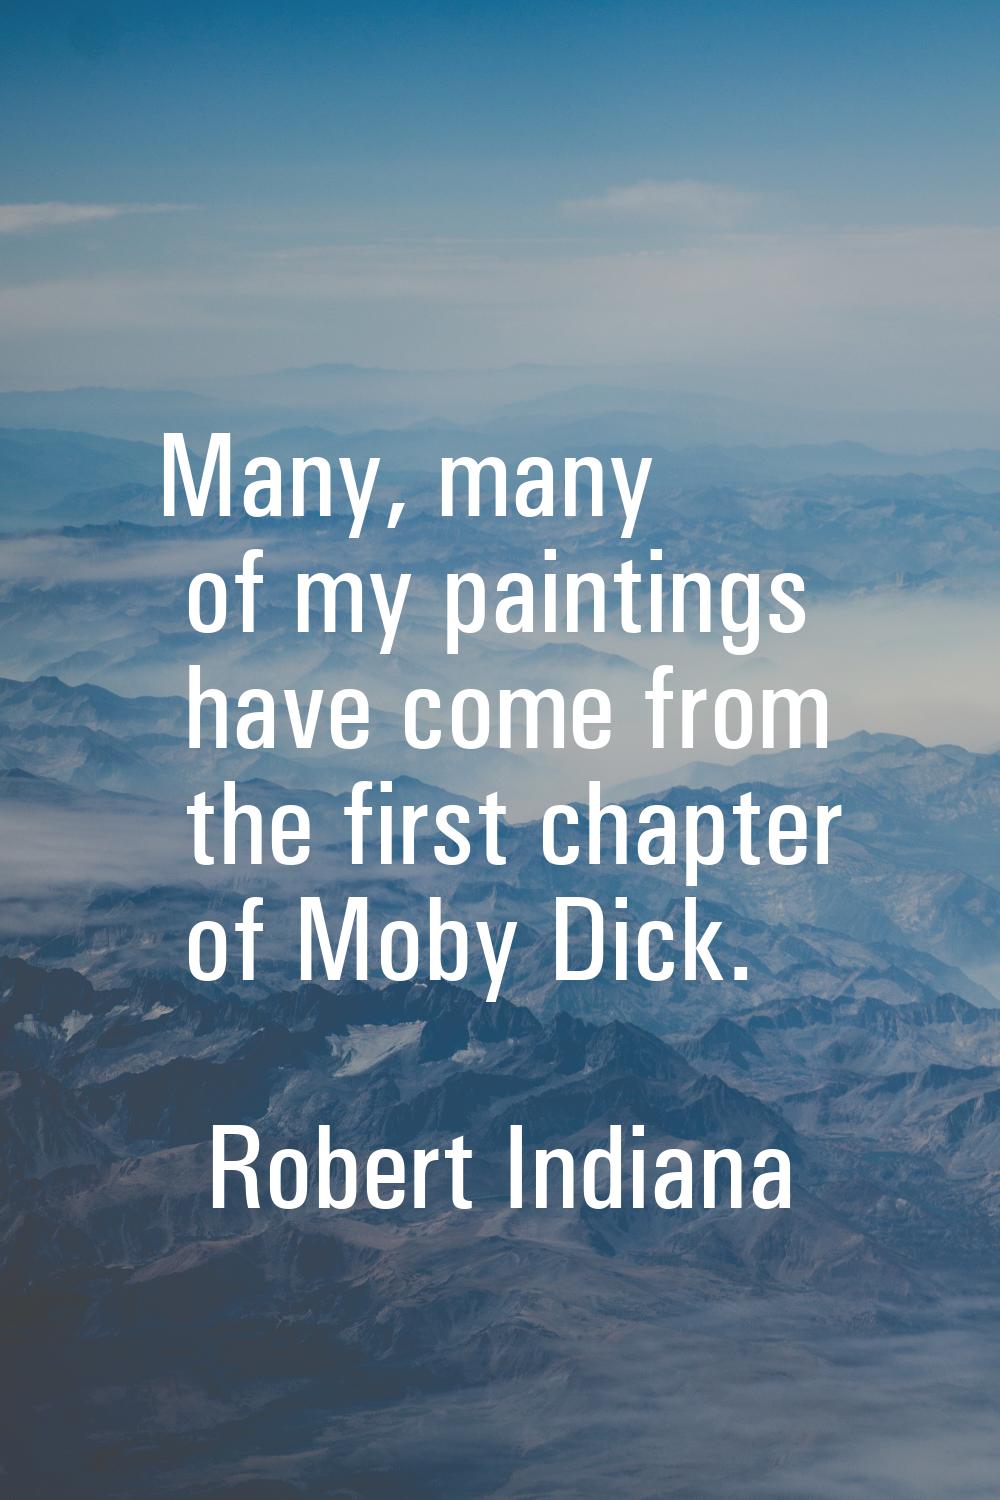 Many, many of my paintings have come from the first chapter of Moby Dick.